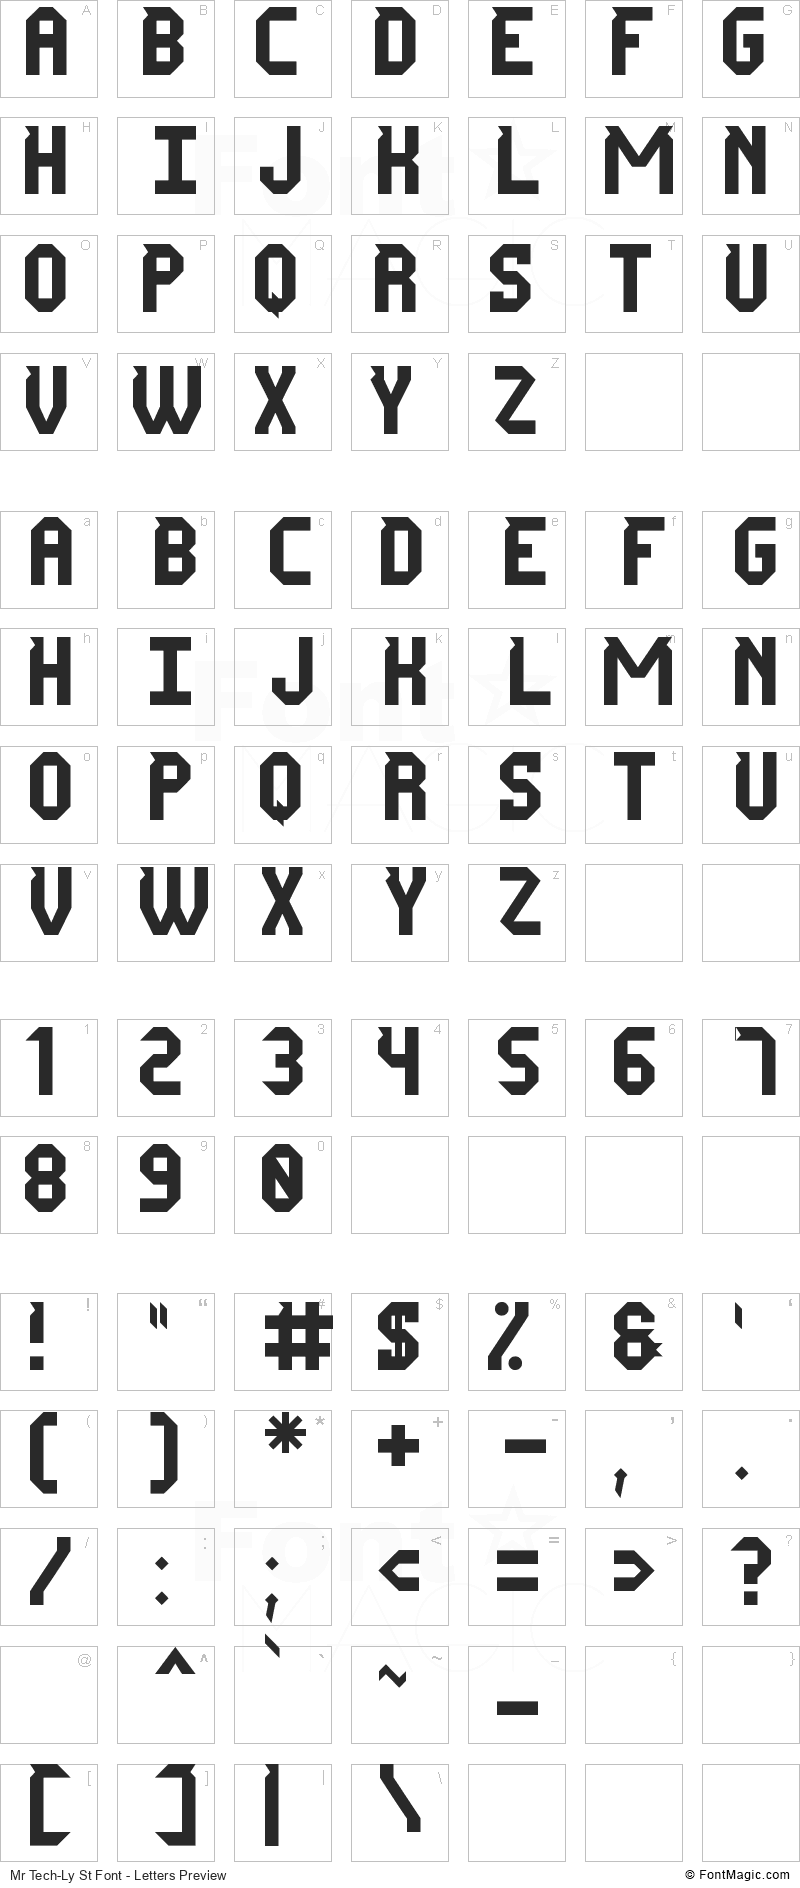 Mr Tech-Ly St Font - All Latters Preview Chart